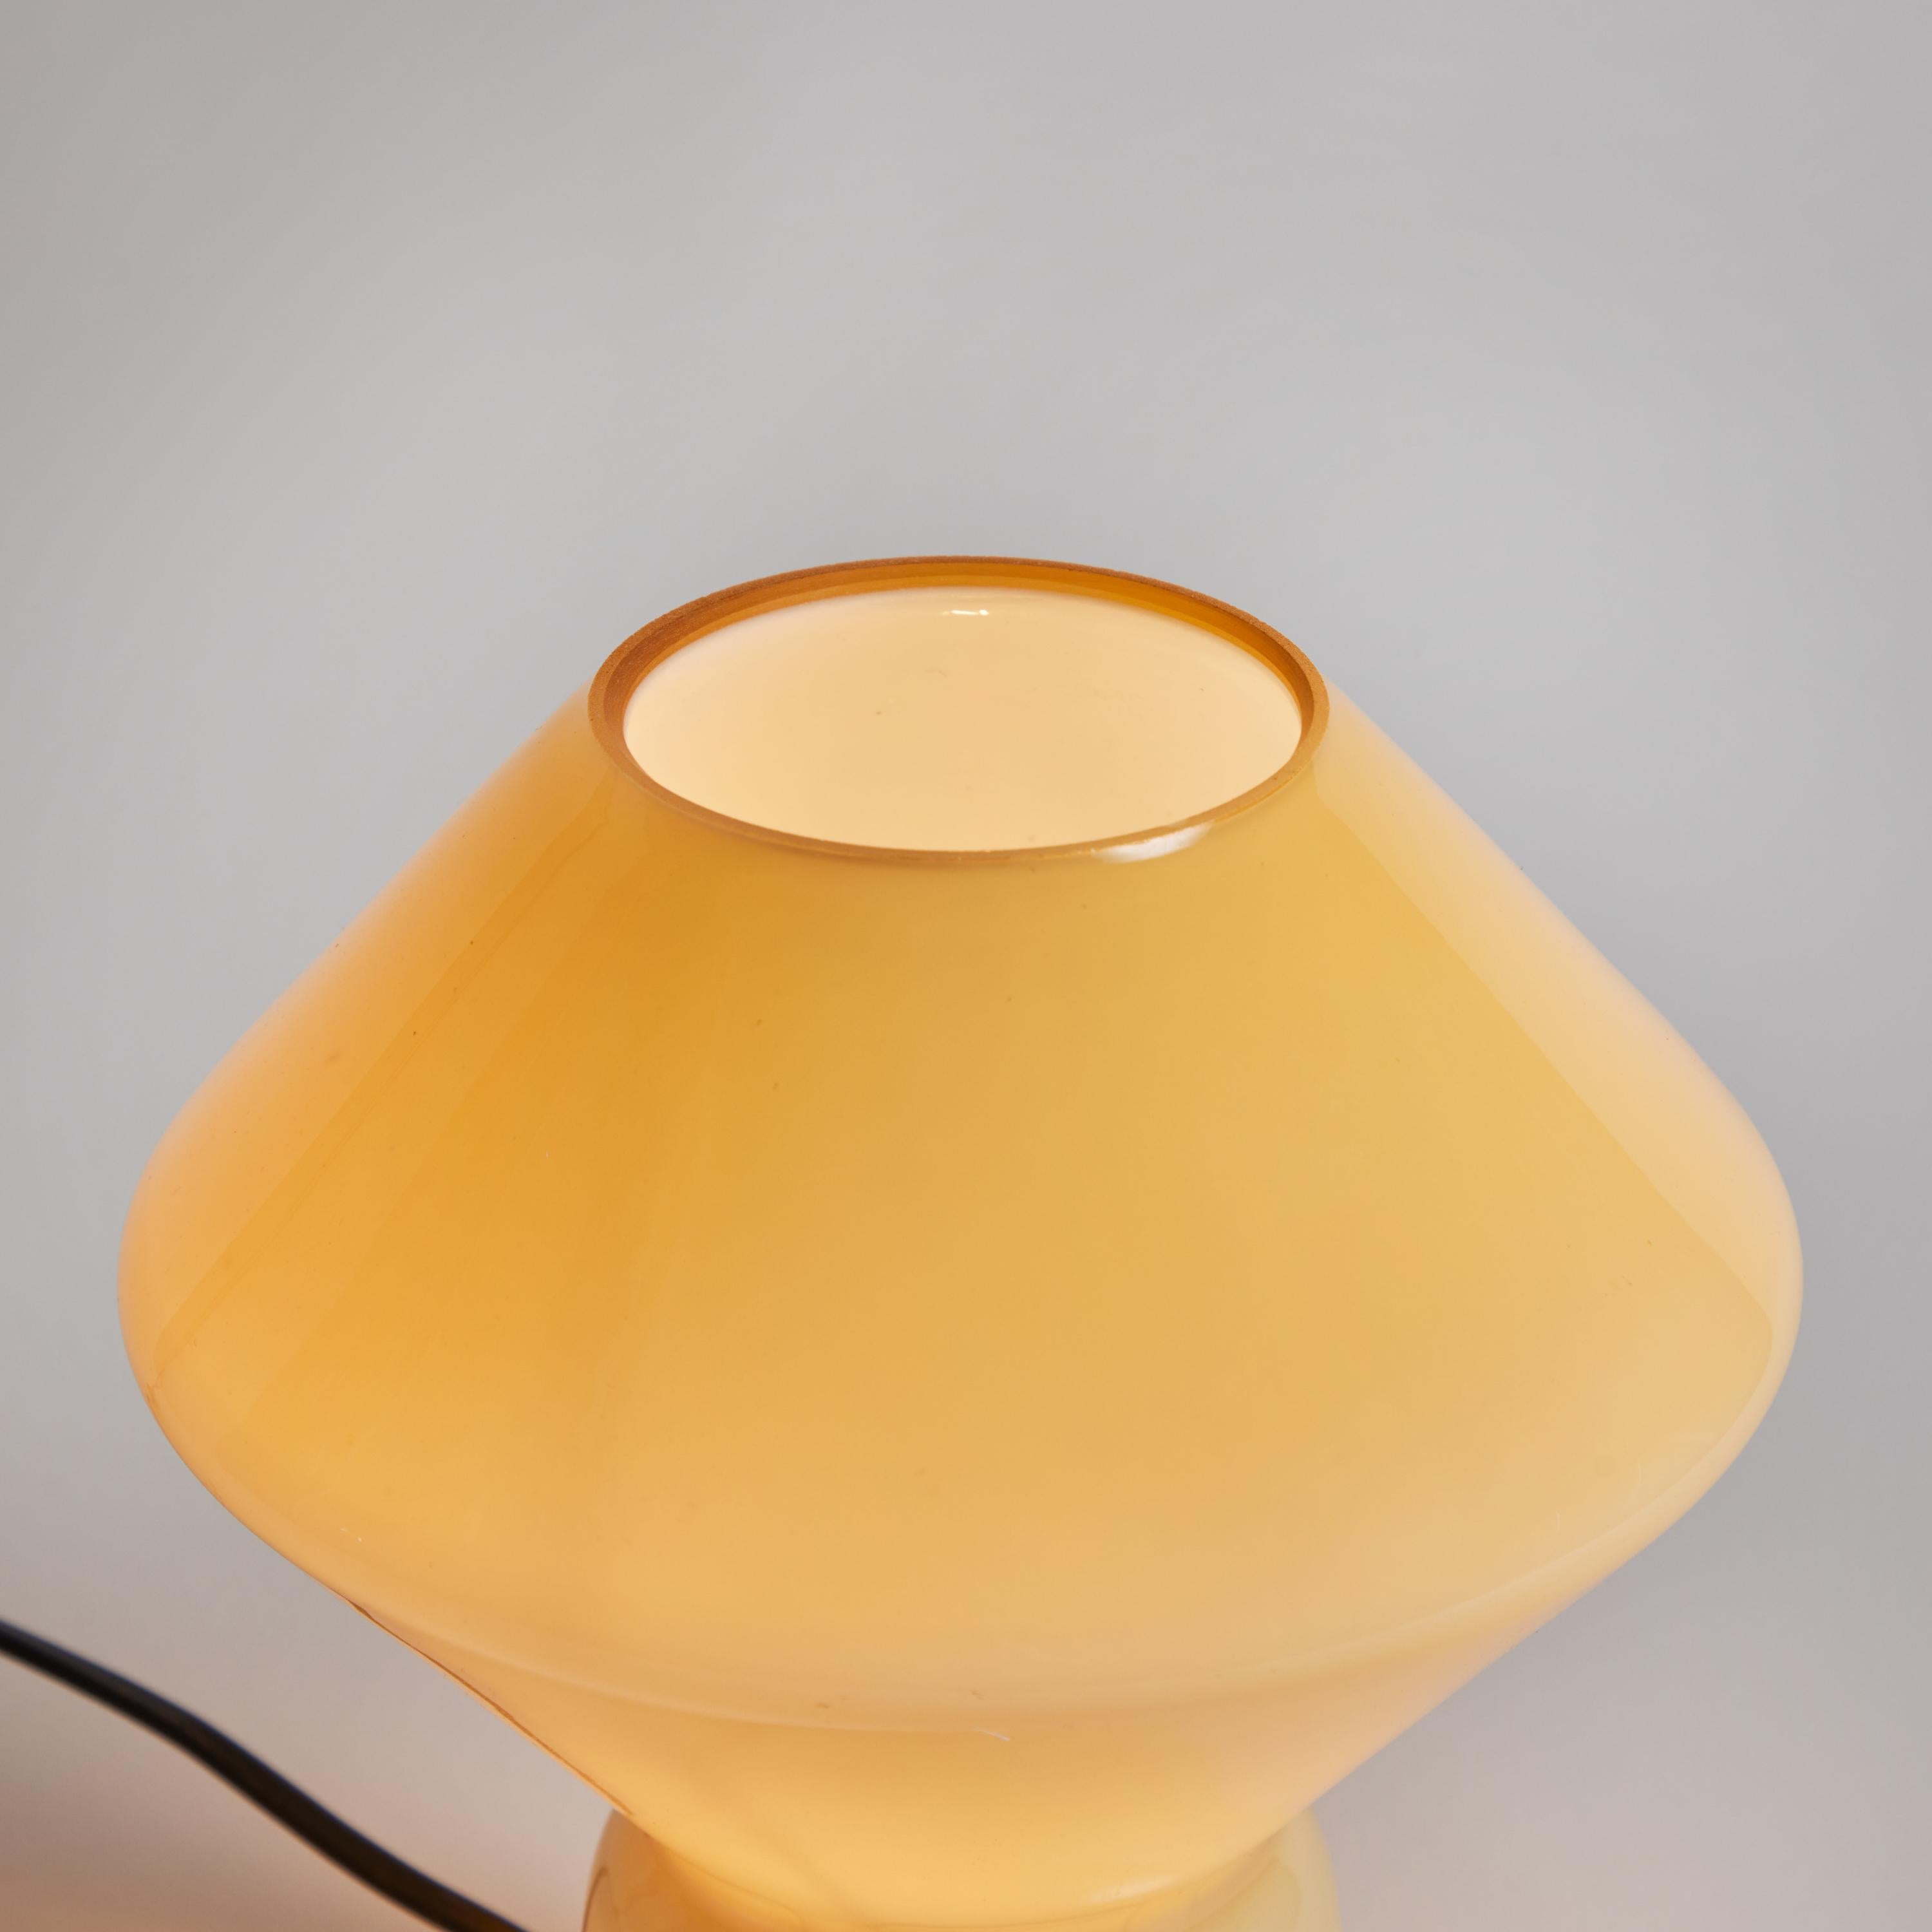 1980s Memphis Style 'Conica' Pale Yellow Glass Table Lamp for Artemide. Designed by Alessandro Mendini. Handcrafted in pale yellow Murano glass, this petite lamp is strongly associated with the 1980s Memphis style that came characterized Artemide's